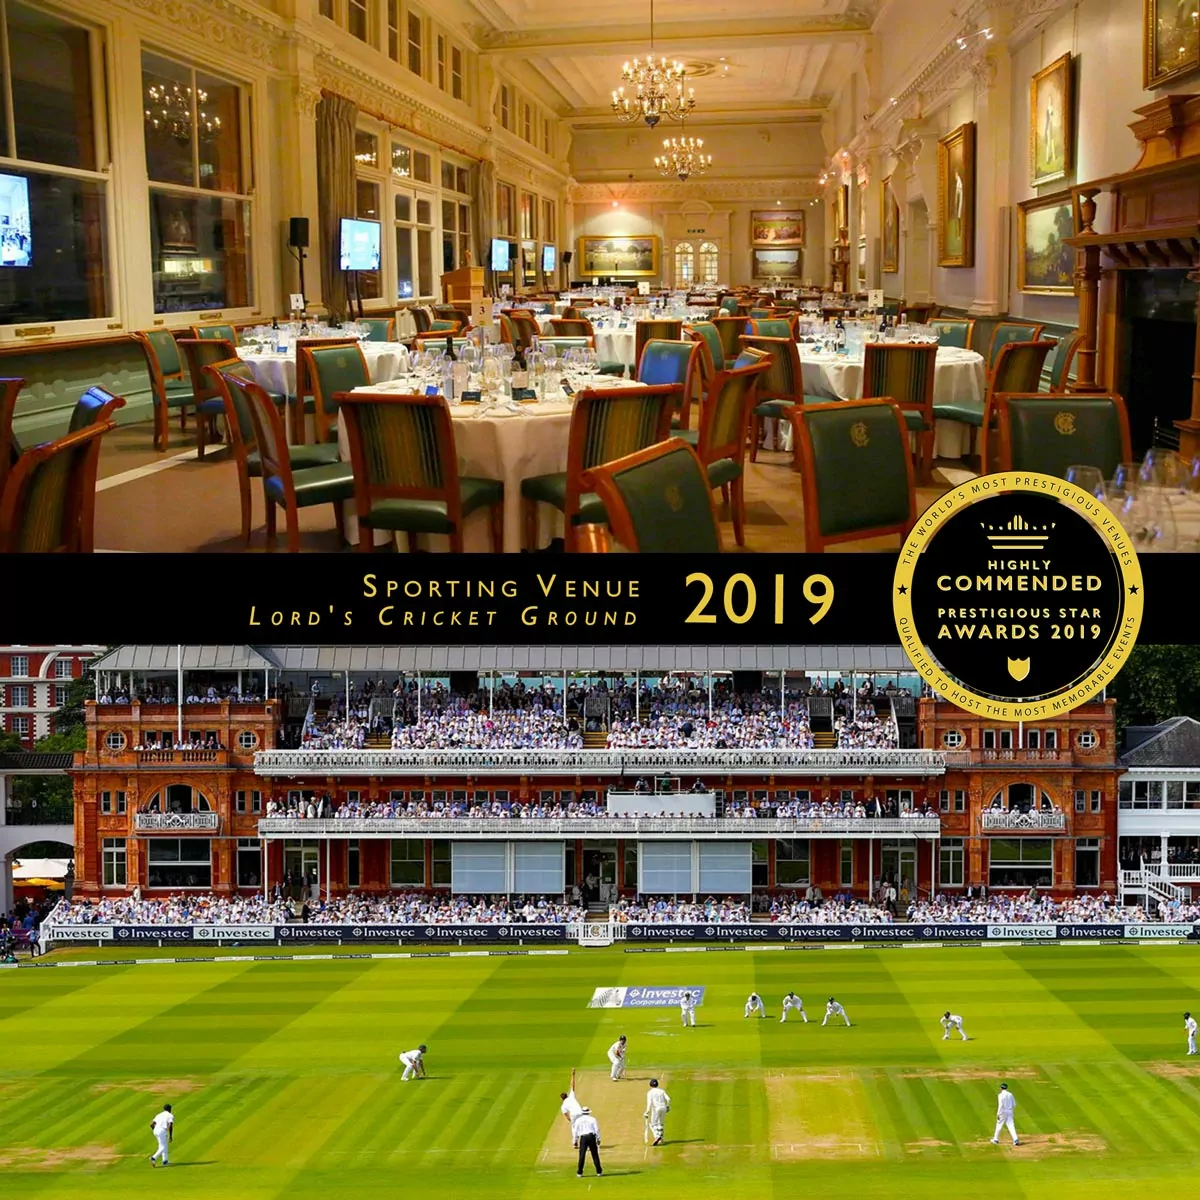 Lord's Cricket Ground Event Spaces, London Prestigious Star Awards